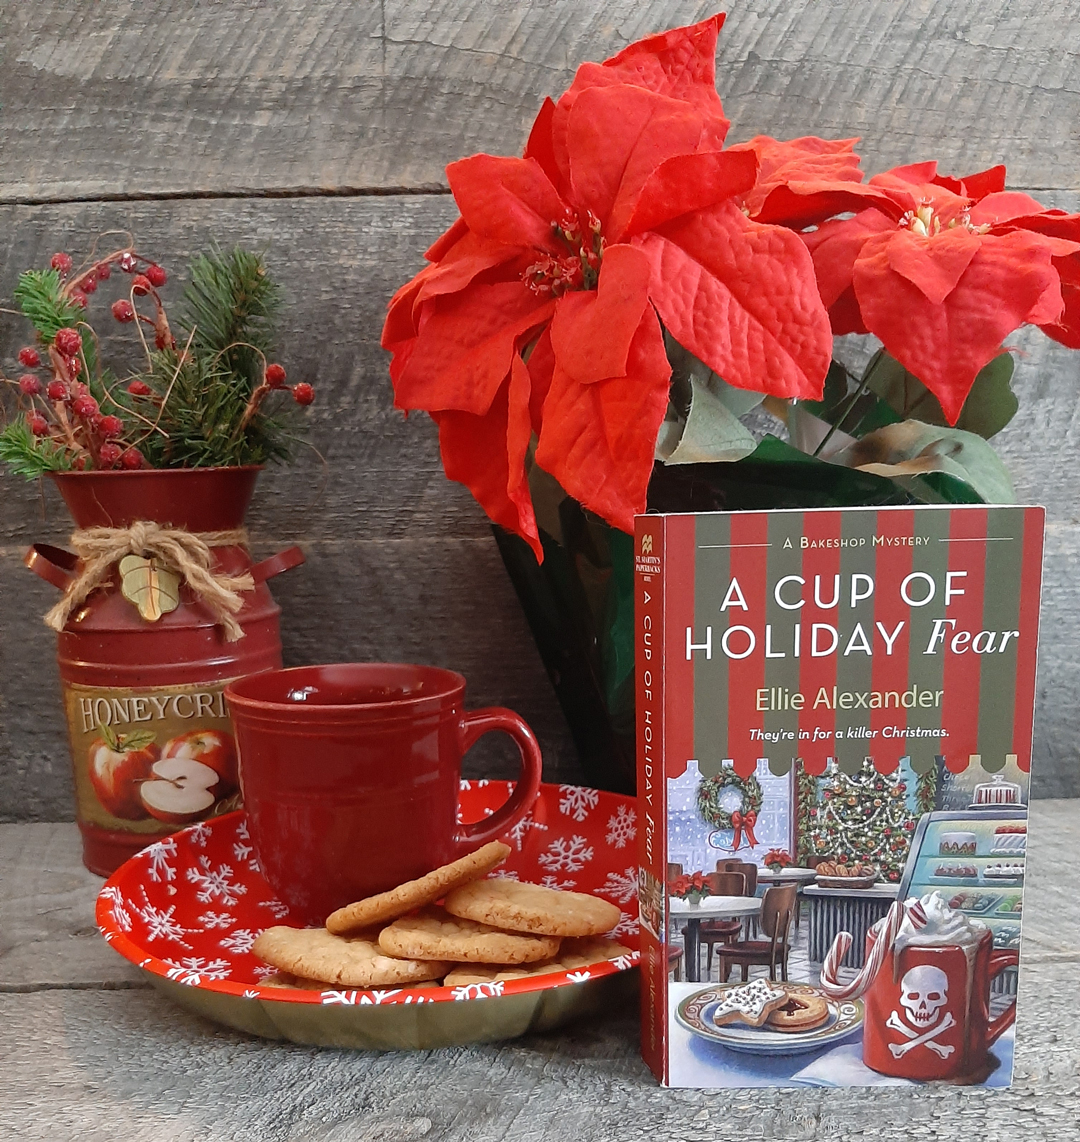 Ellie Alexander – A Cup of Holiday Fear